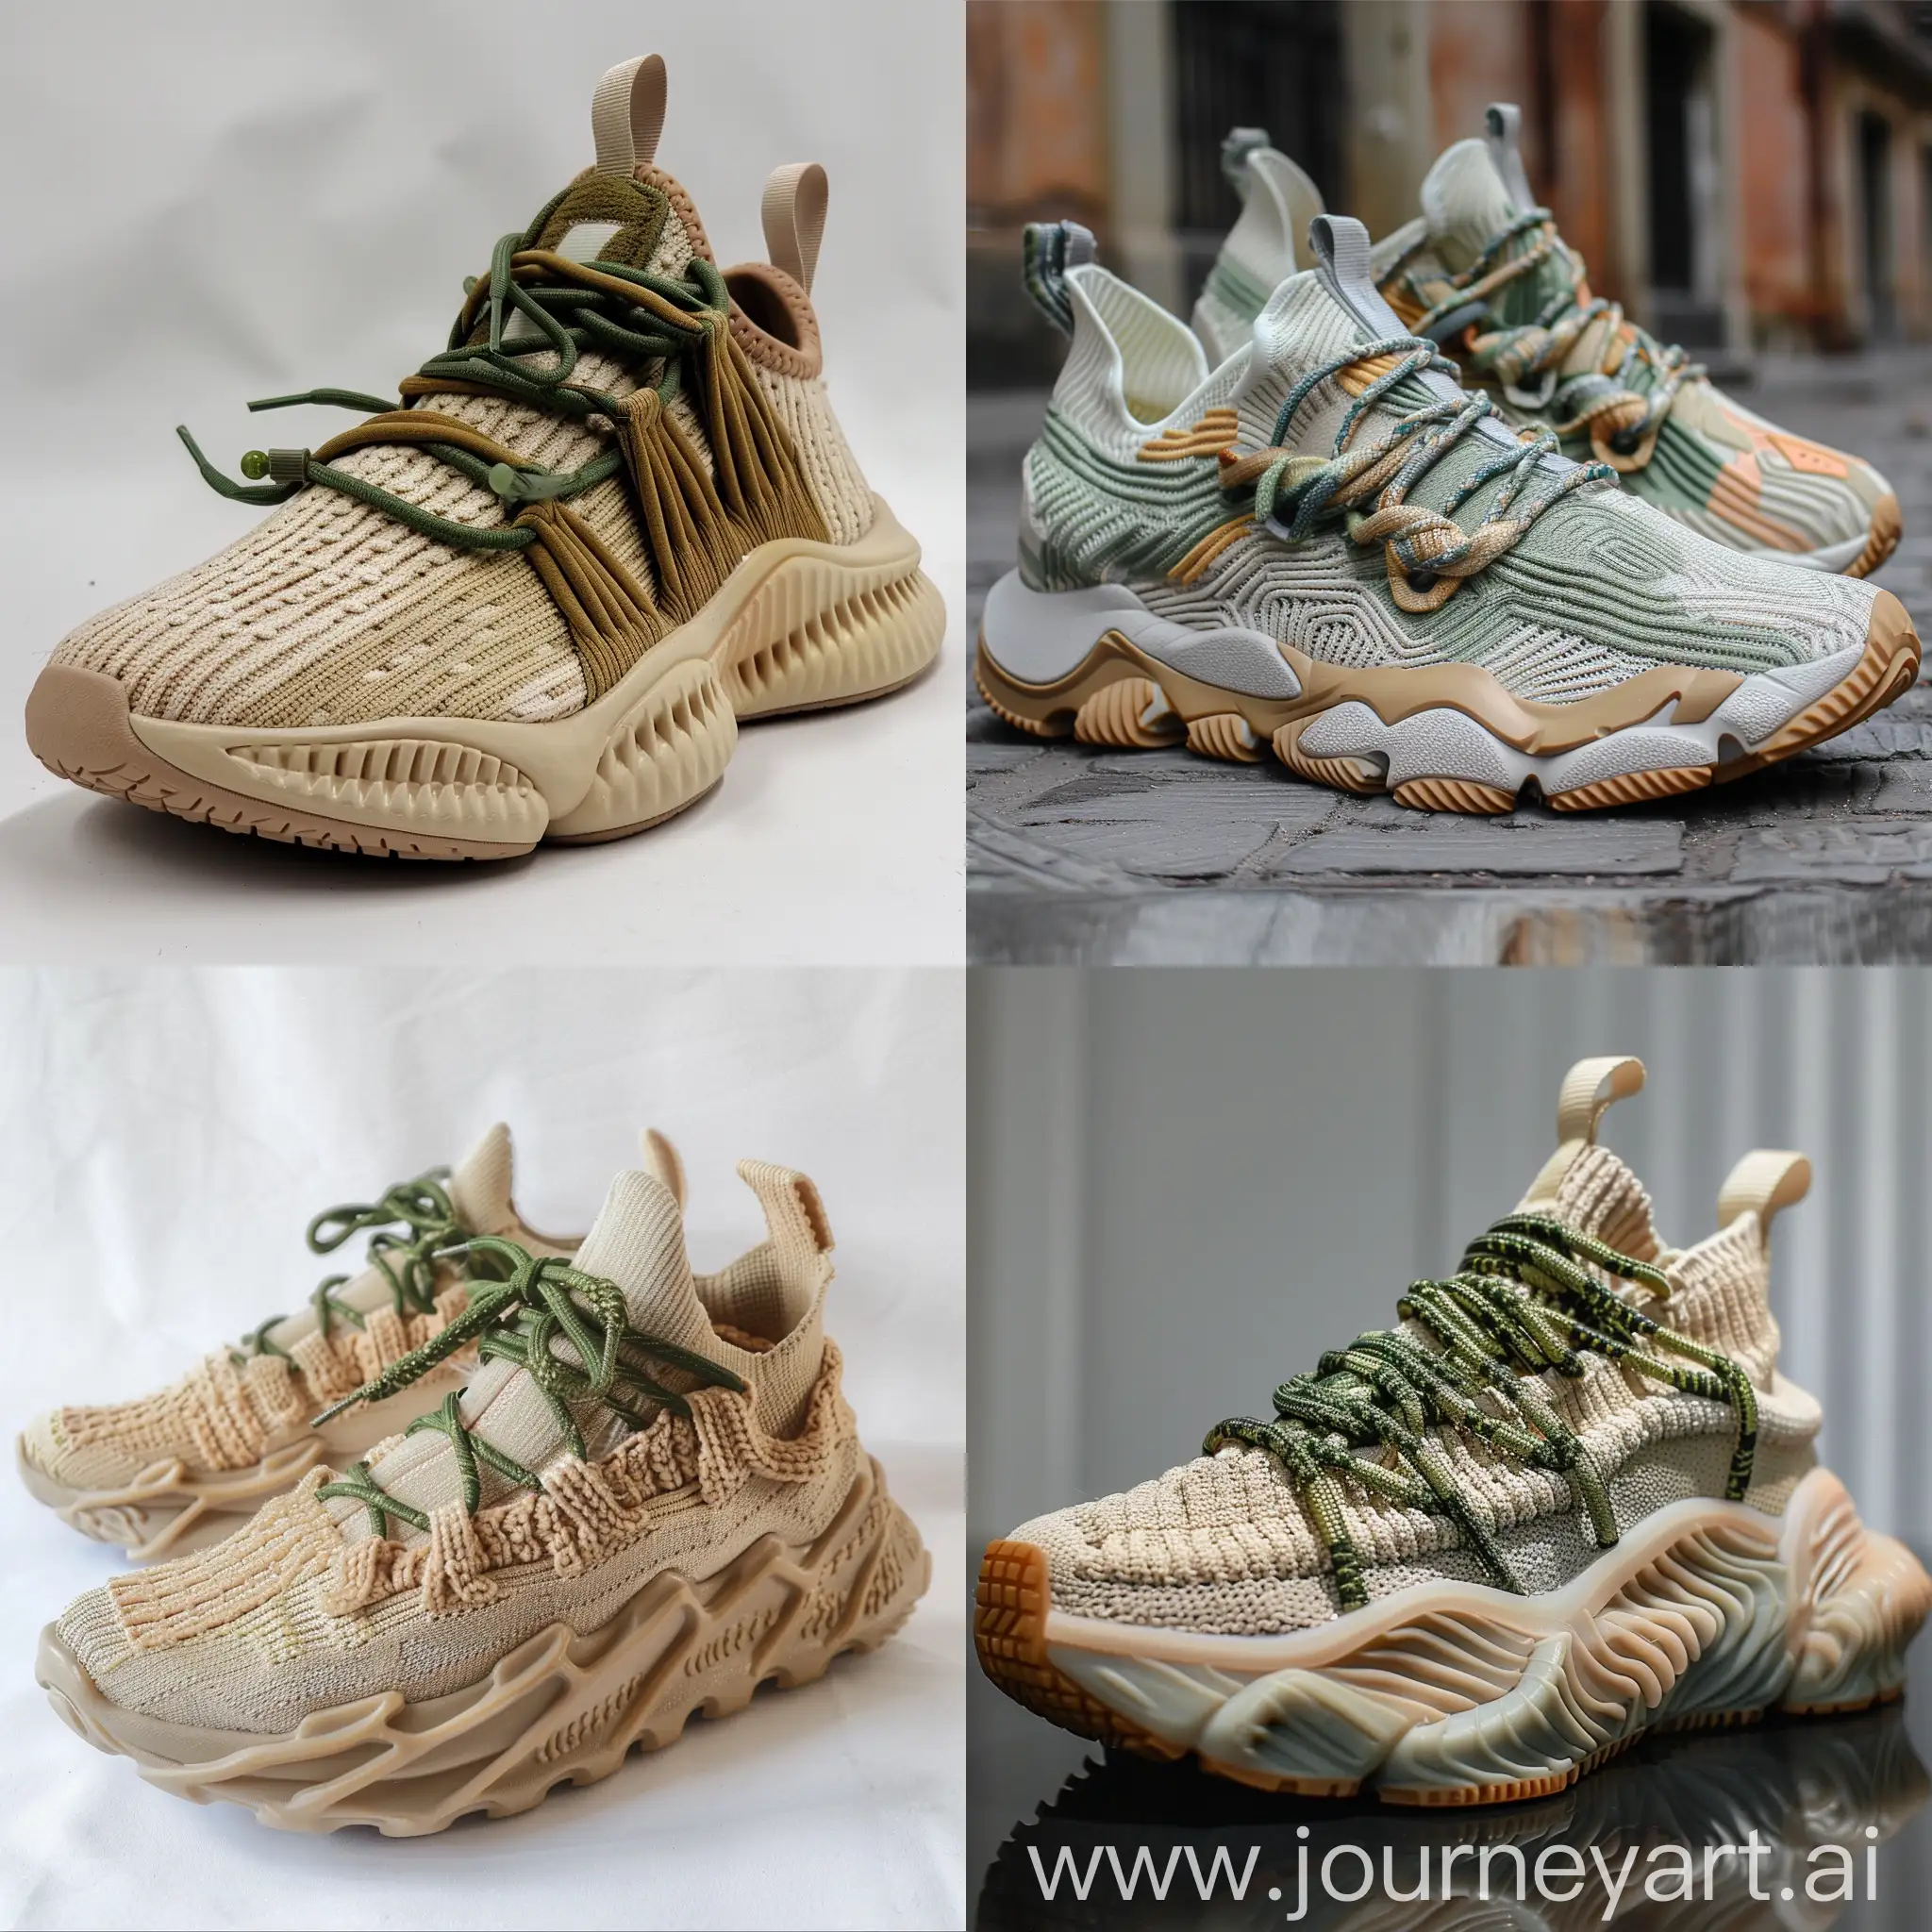 Design sneakers , chunky , inspiration by knitted fabrics , do some knitted lines on upper , rubber outsole , draw knitted lines on midsole , laces inspiration by travis scott hair , knitted laces , colors beige/green/olive/butter/cream , no leather 